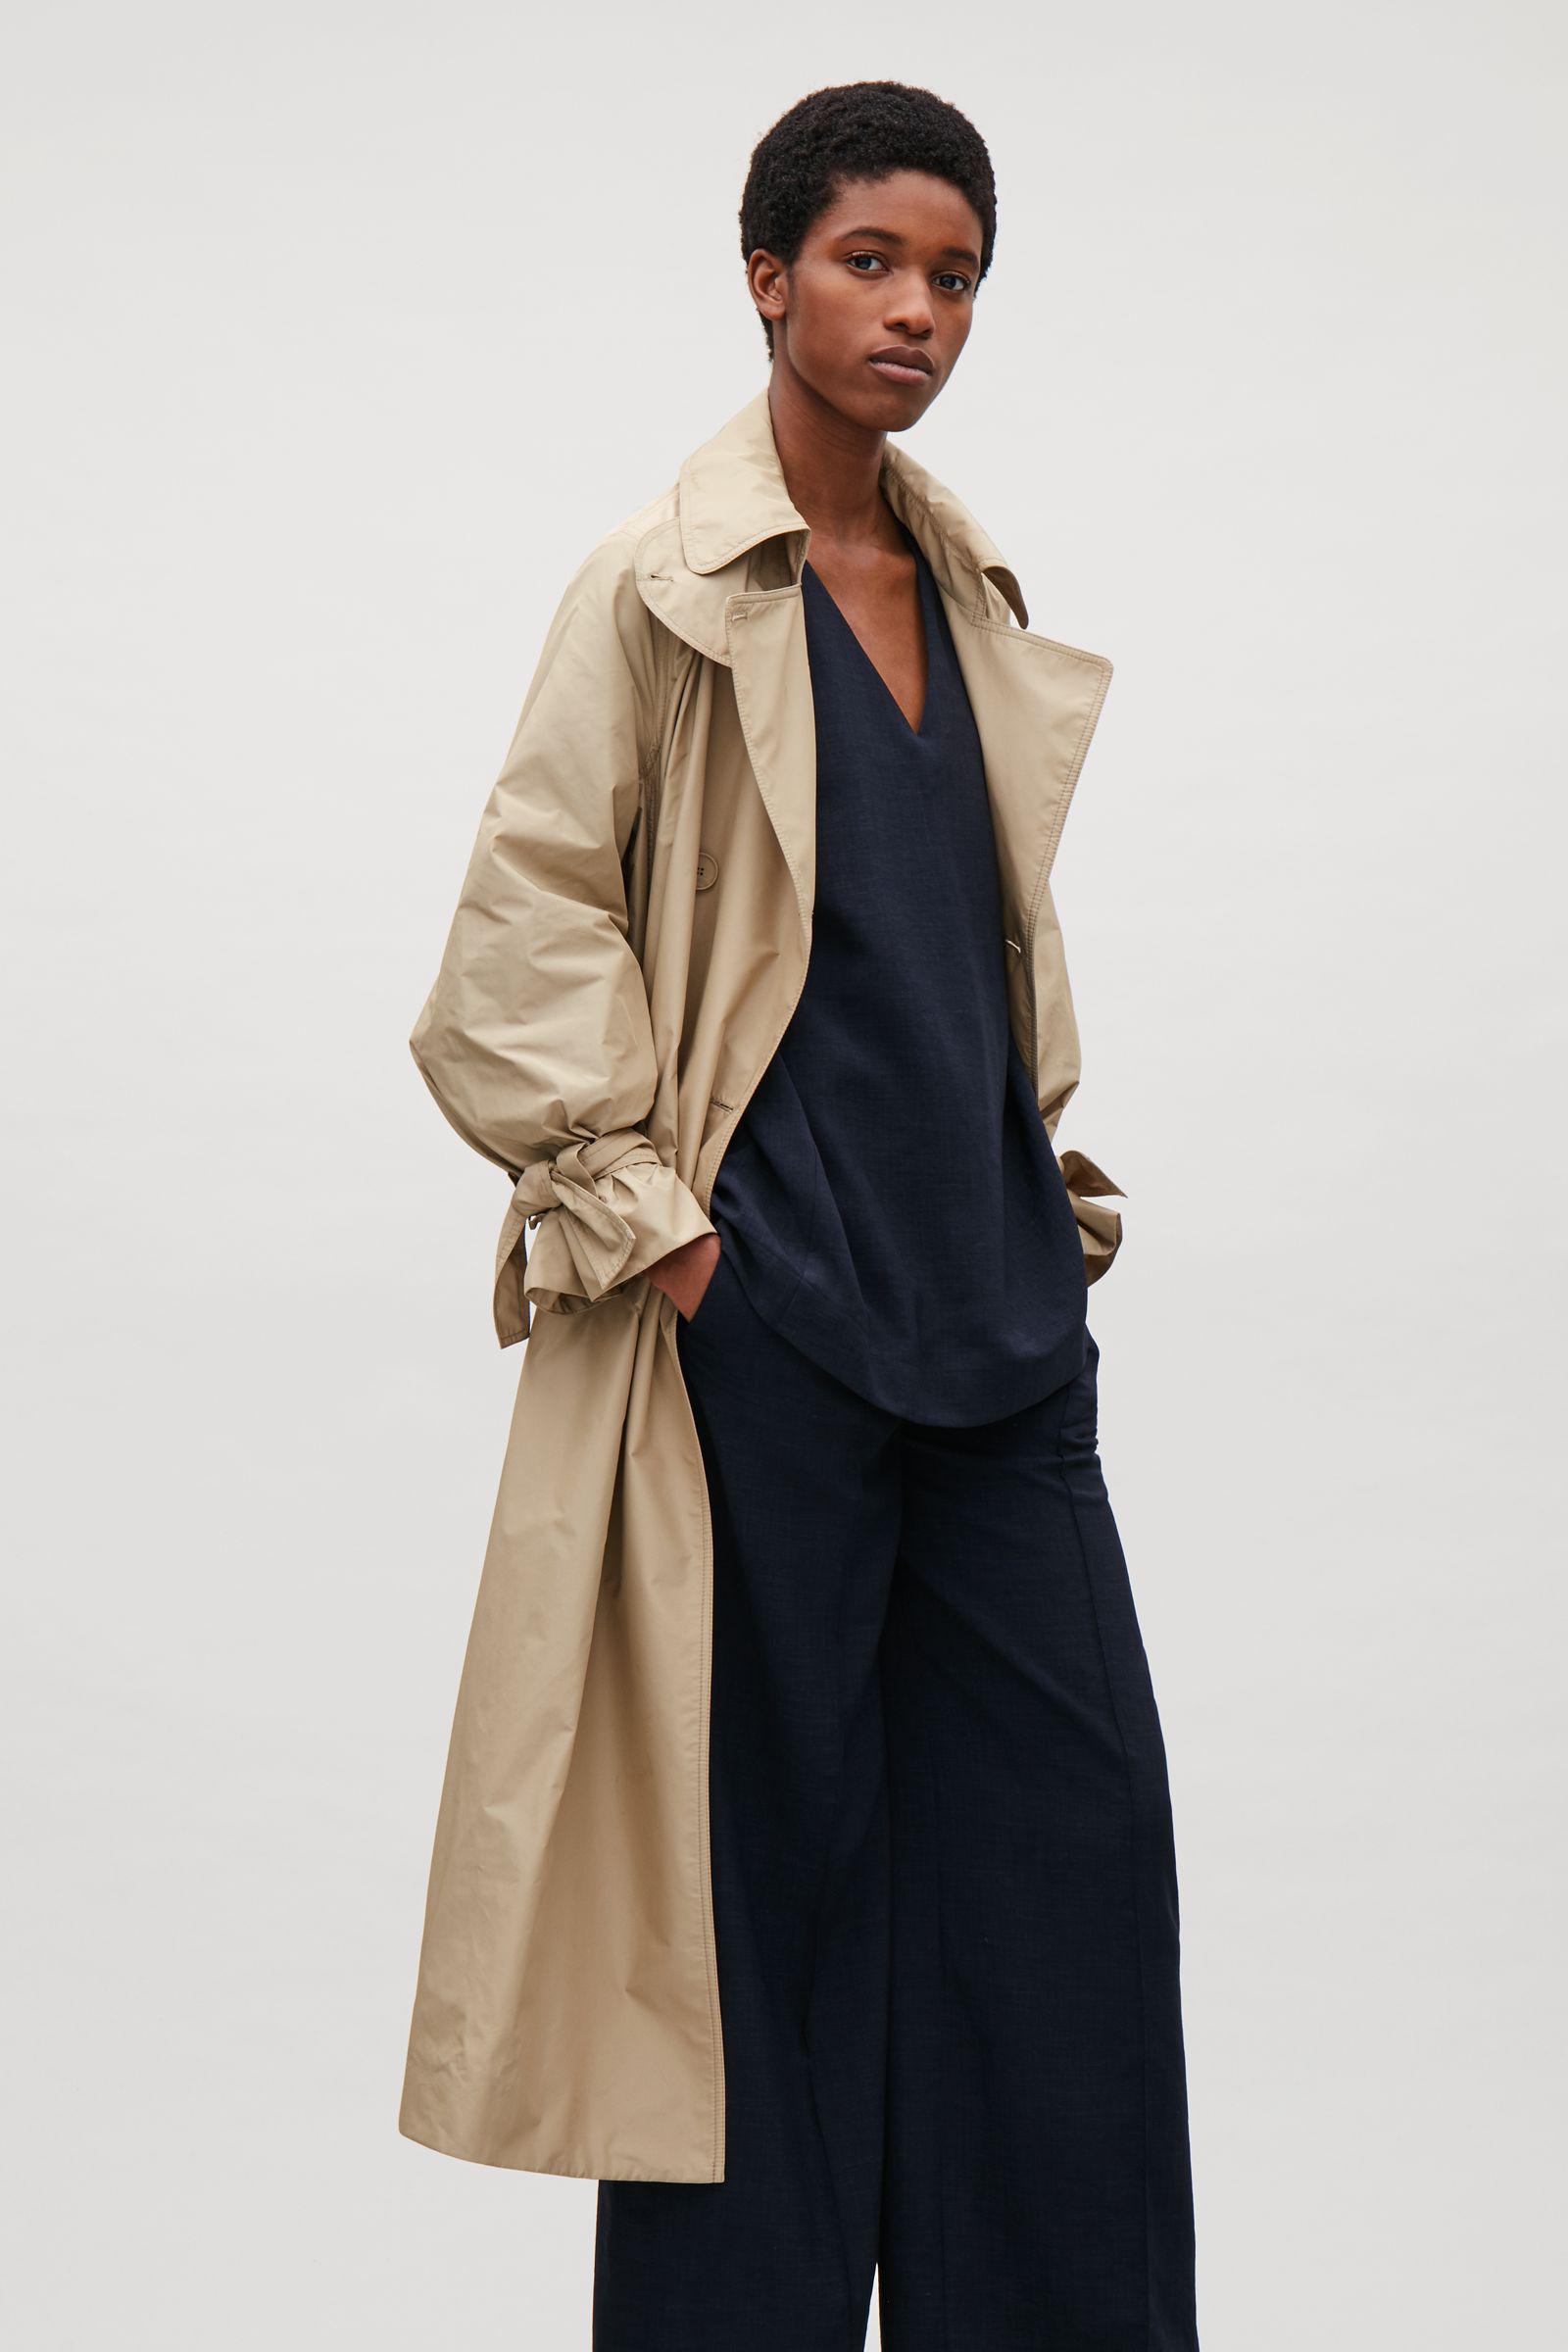 COS Synthetic Oversized Nylon Trench Coat in Sand (Natural) - Lyst